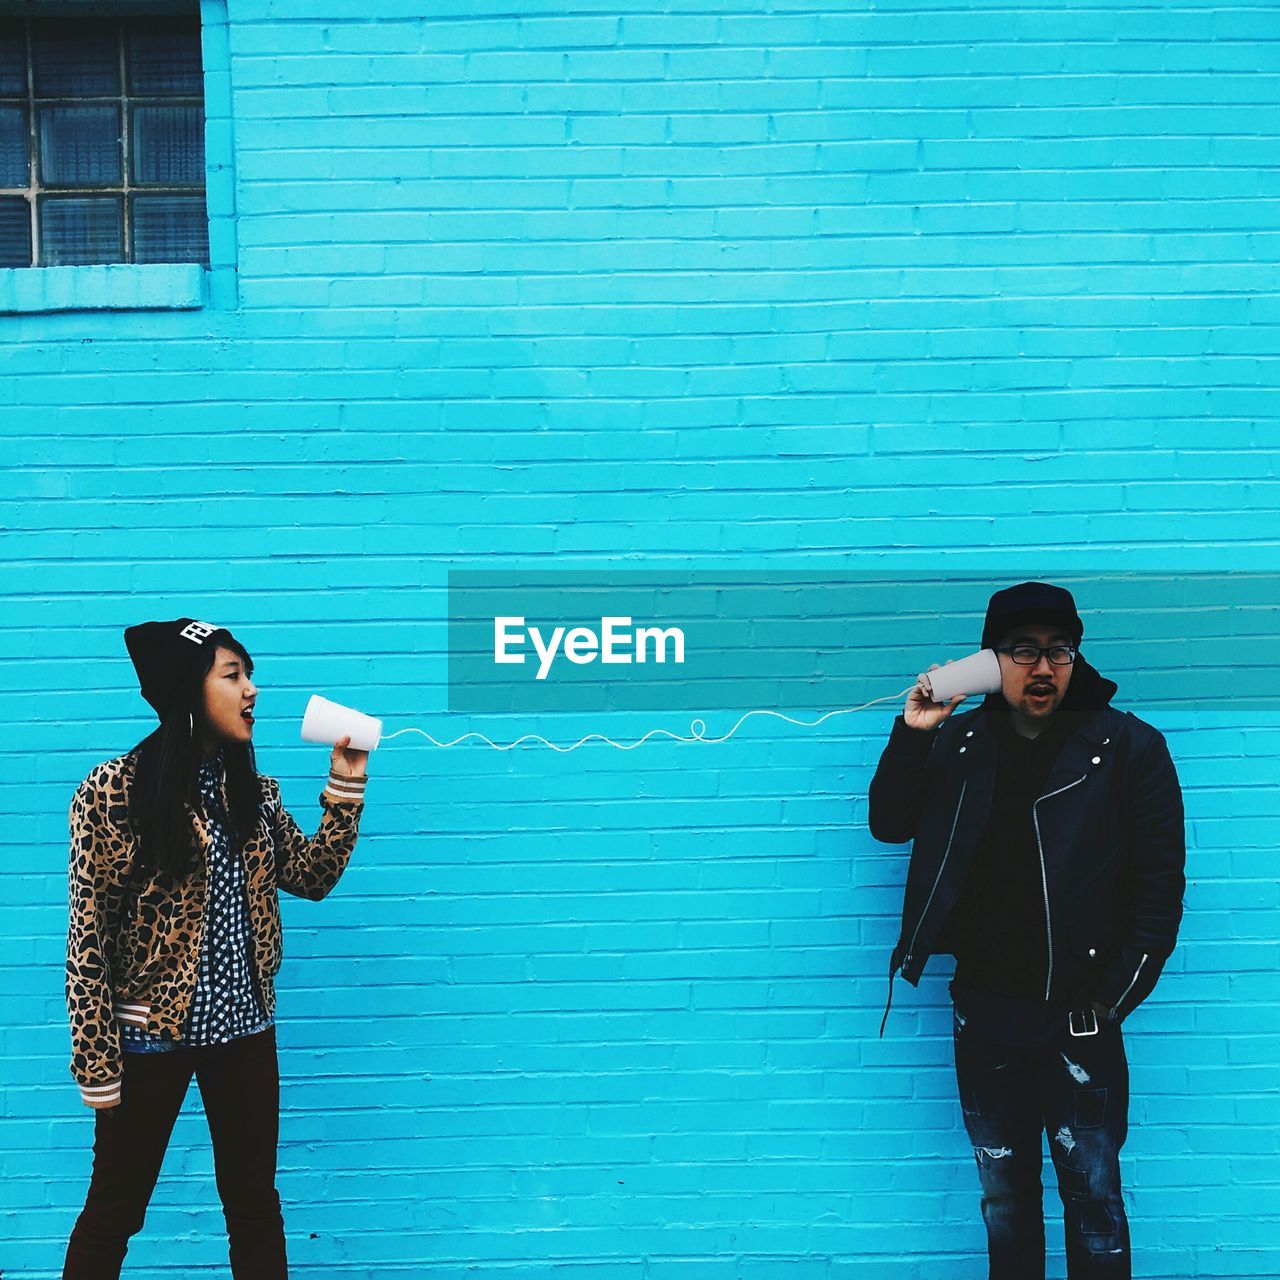 Man and woman using cups and string to communicate against blue wall